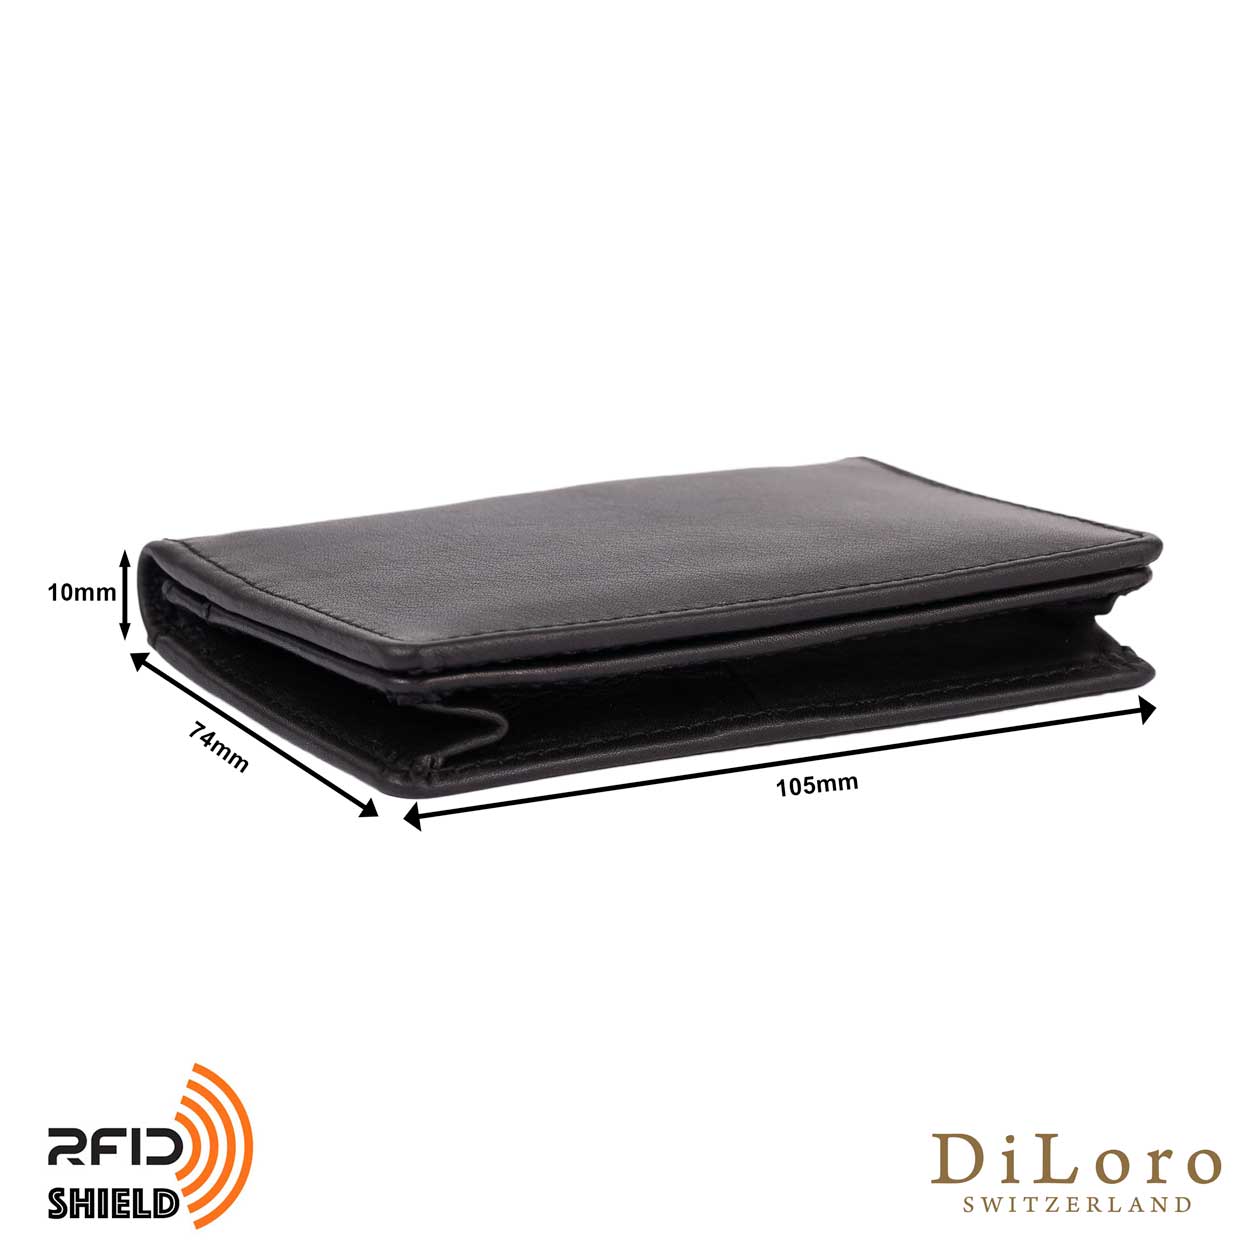 DiLoro Travel Leather Business Card Wallet Black - Dimensions (Empty)